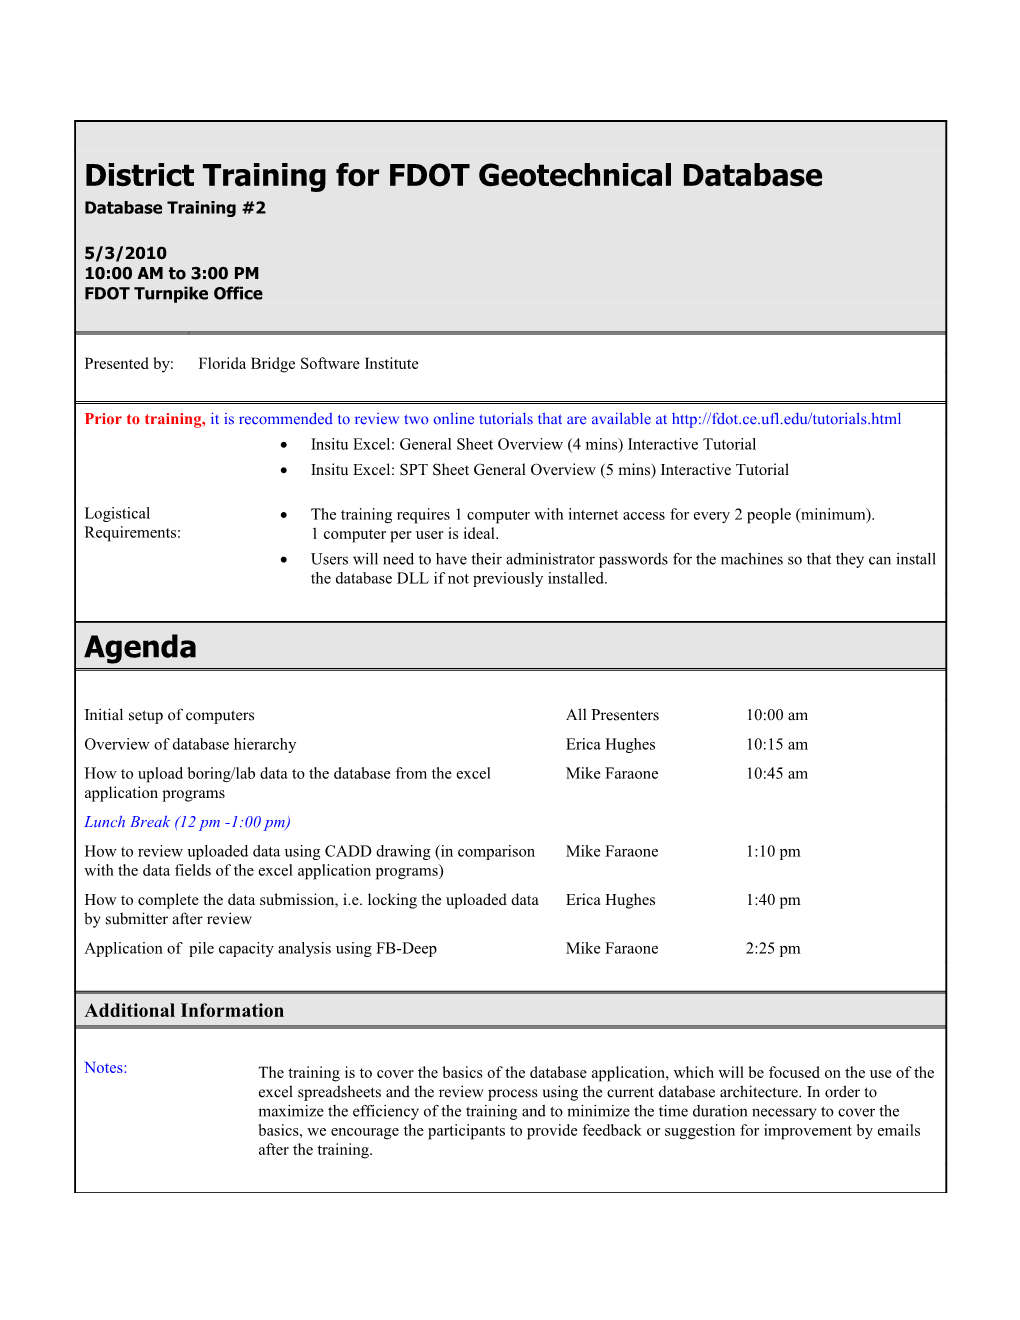 District Training for FDOT Geotechnical Database